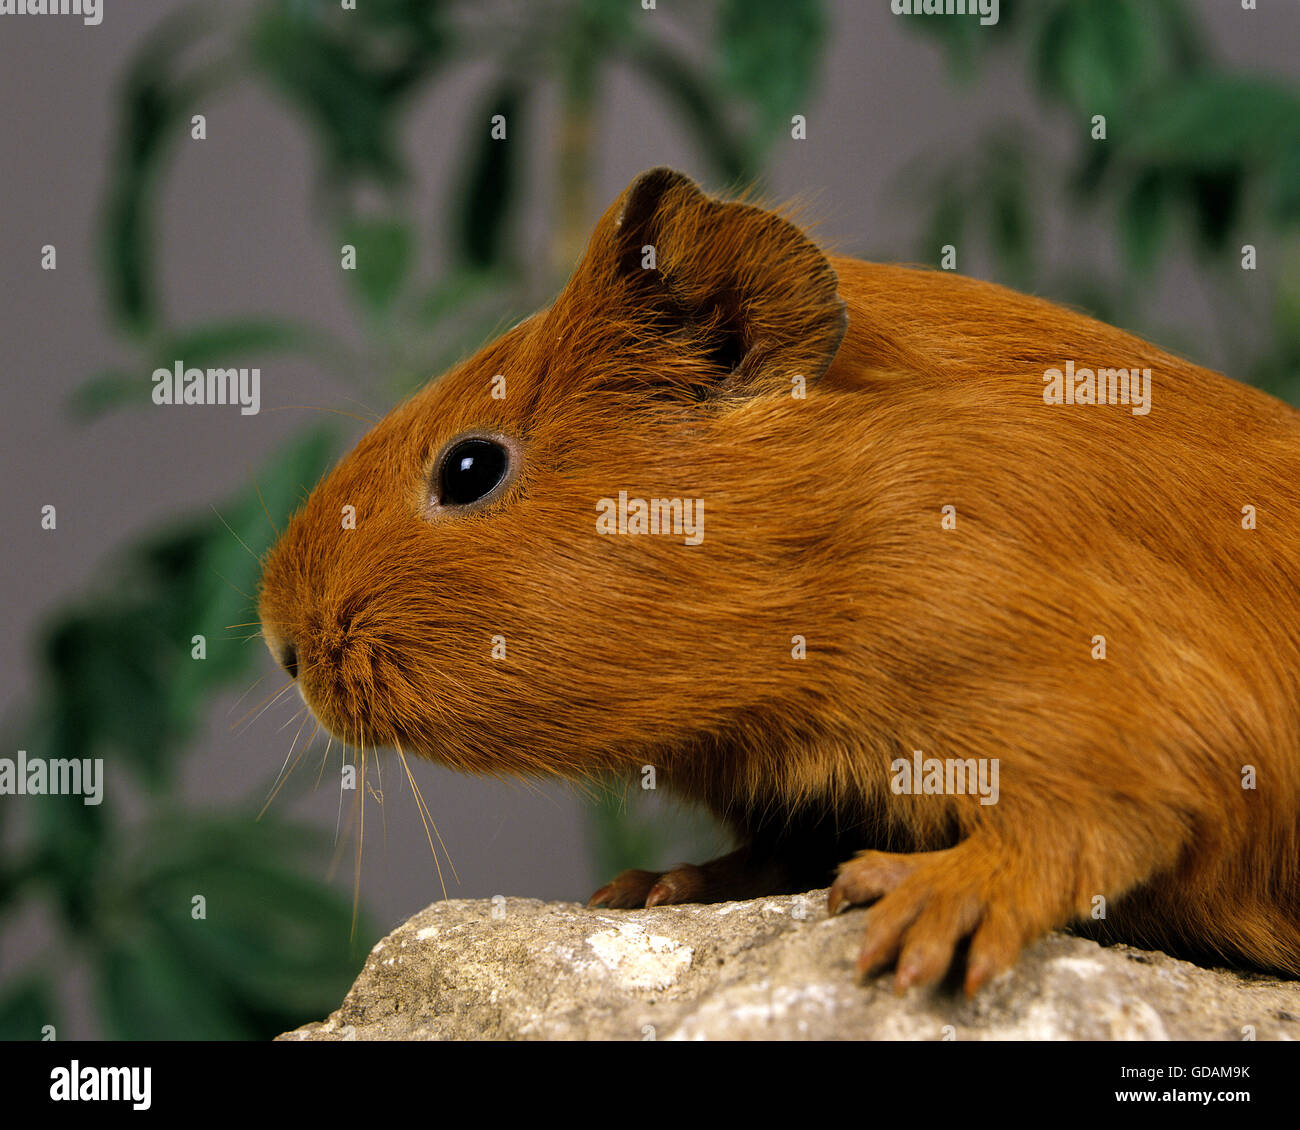 Guinea Pig, cavia porcellus, Adult on Stone Stock Photo